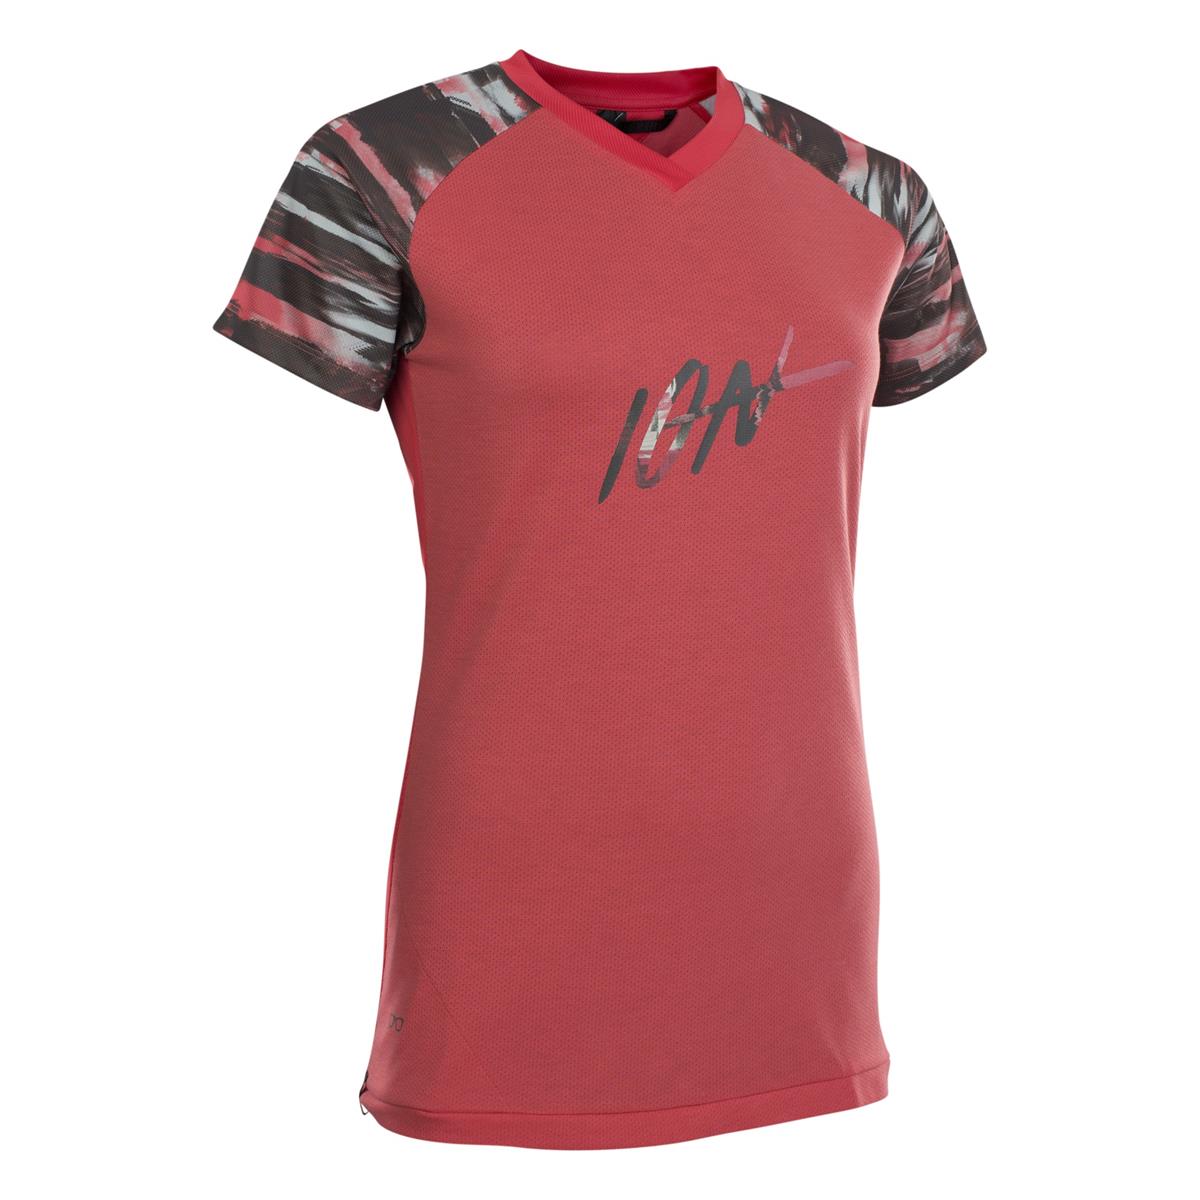 ION Femme Maillot VTT Manches Courtes Scrub Amp Pink Isback